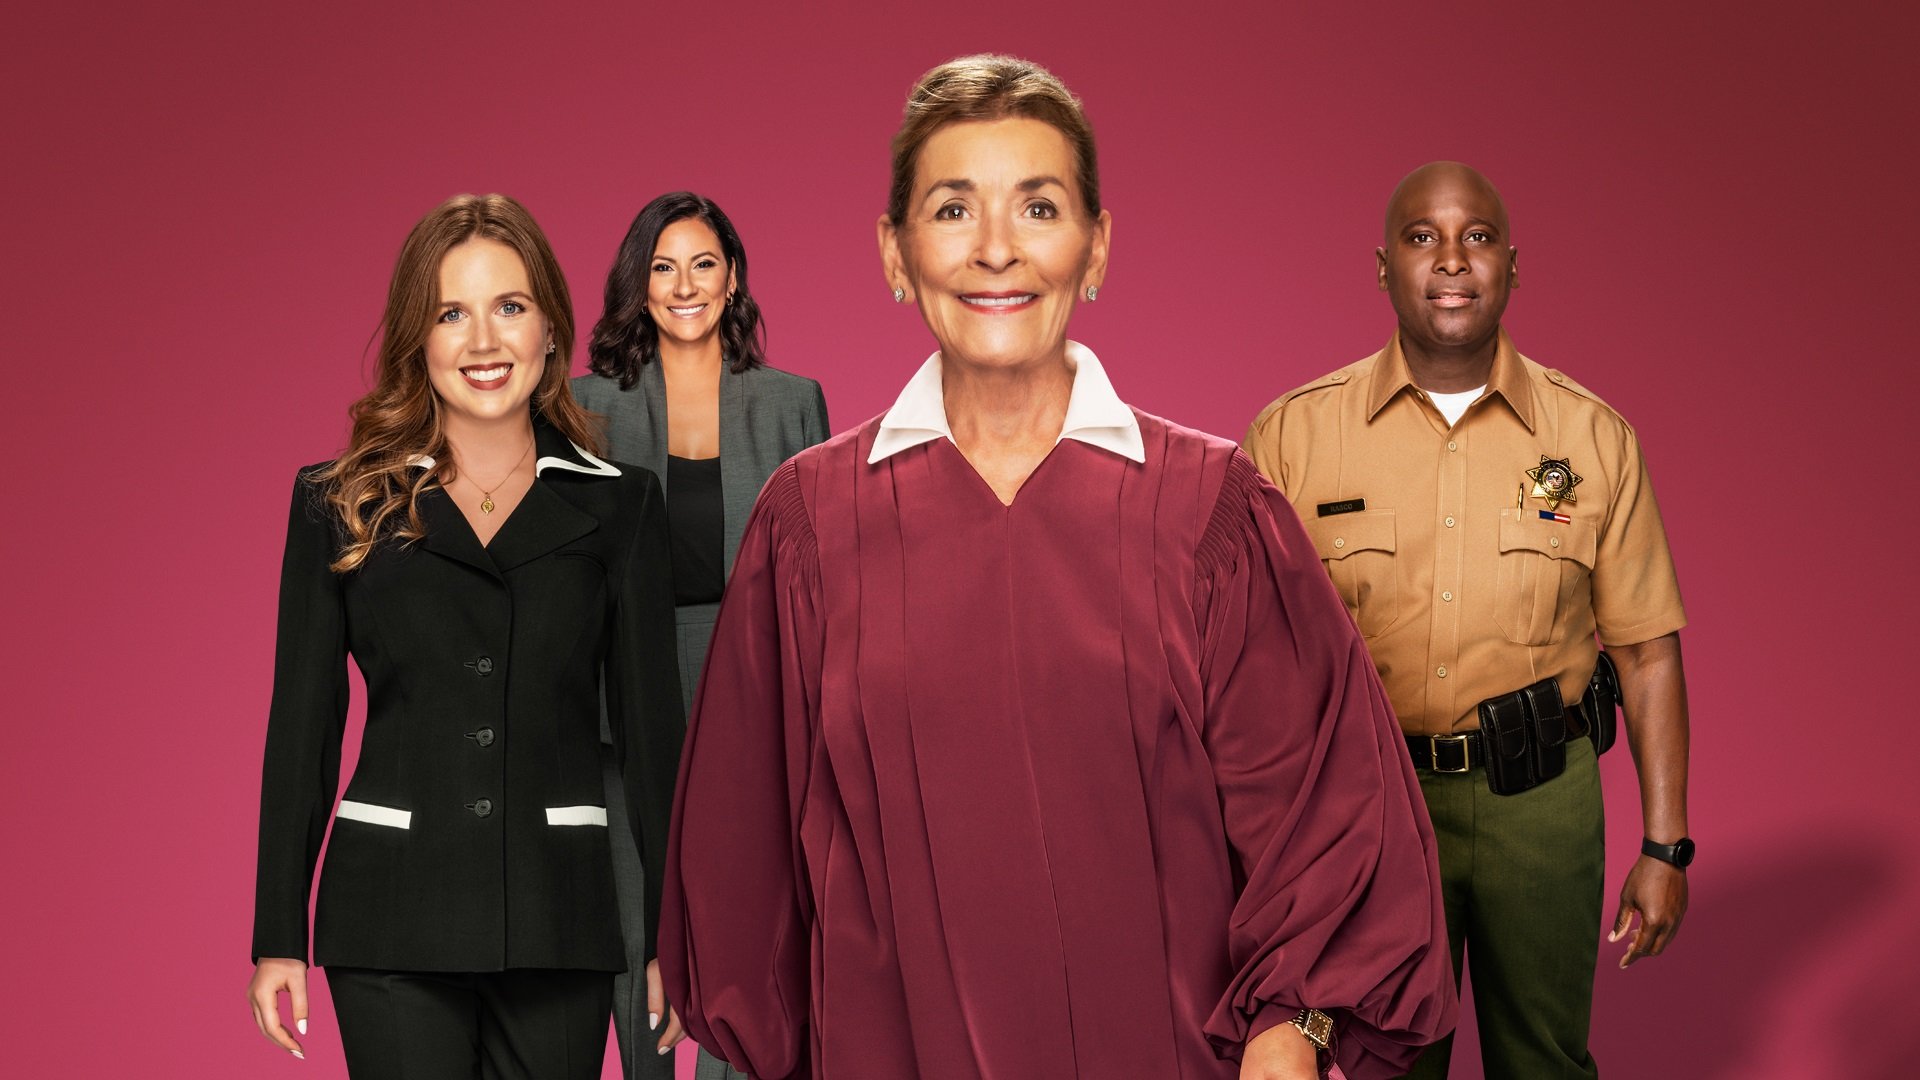 Key art for 'Judy Justice' episodes with Sara Rose, Whitney Kumar, Judge Judy Sheindlin and Kevin Rasco